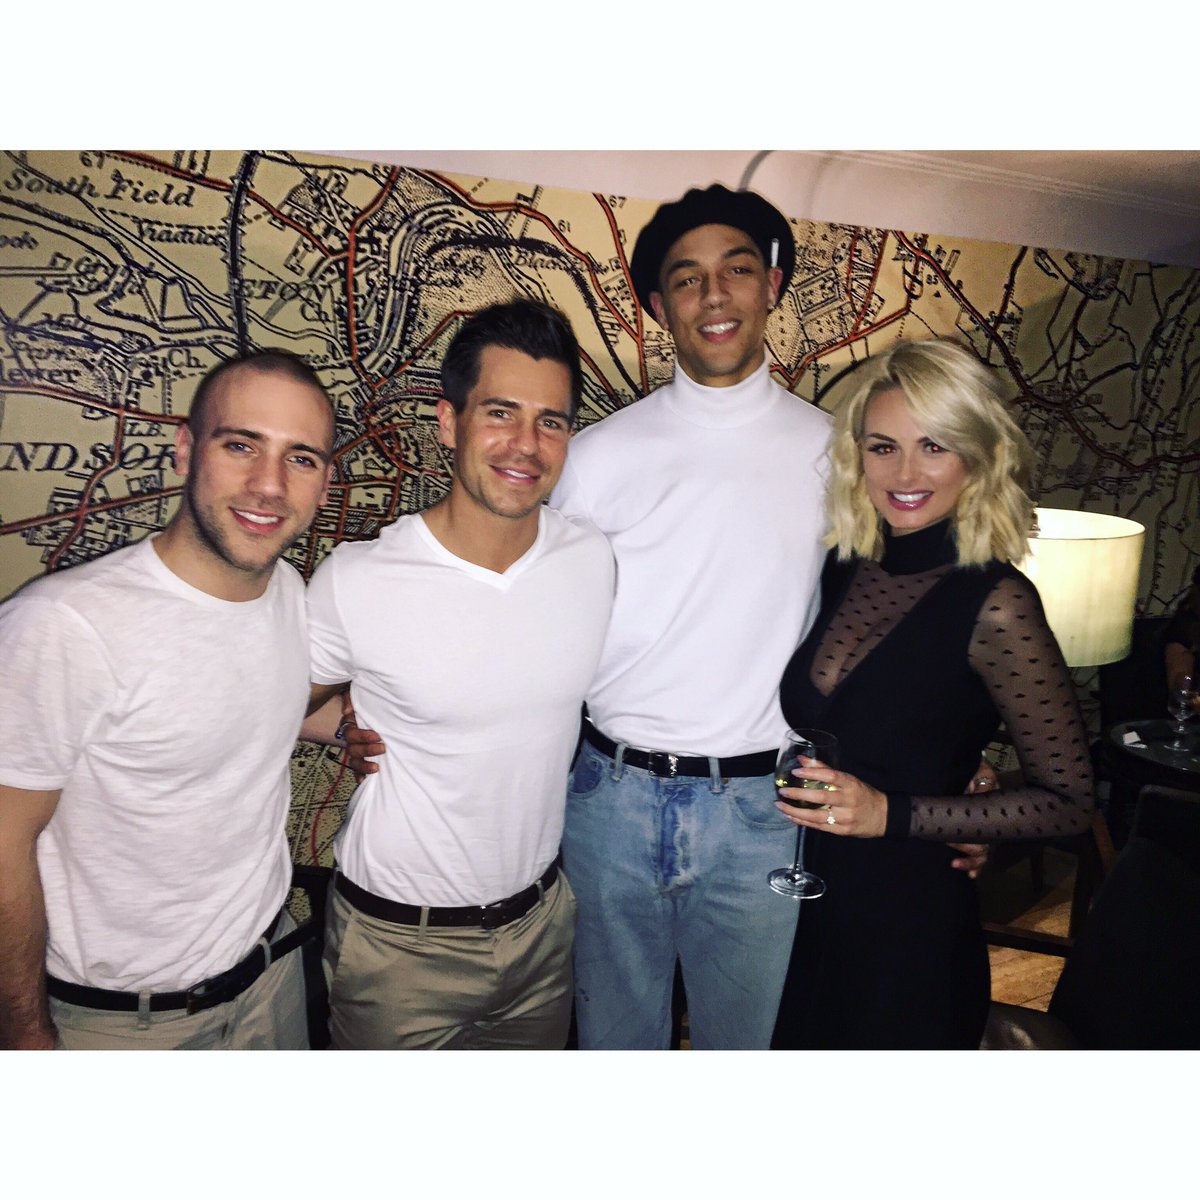 Amaze night with these eggs! ❤ @olivermellor @Jimmy_Essex @CharlesMusic_ #OutOut https://t.co/cvnq8U2n7D